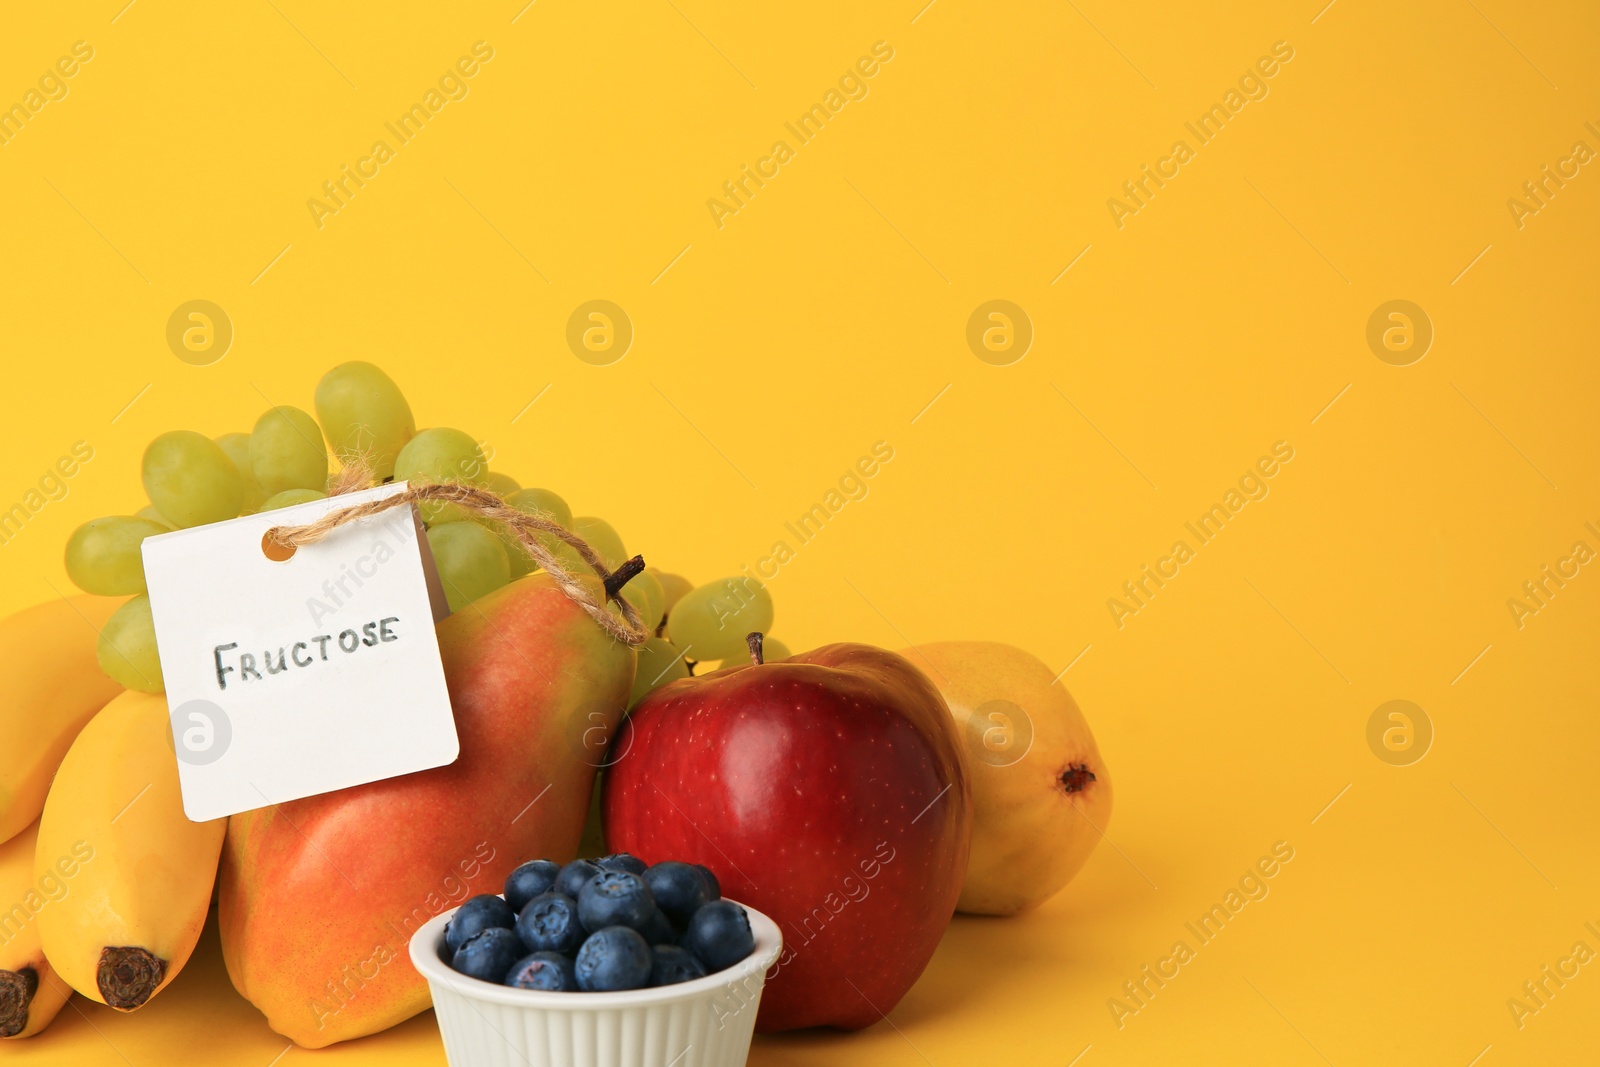 Photo of Card with word Fructose, delicious ripe fruits and blueberries on yellow background, space for text